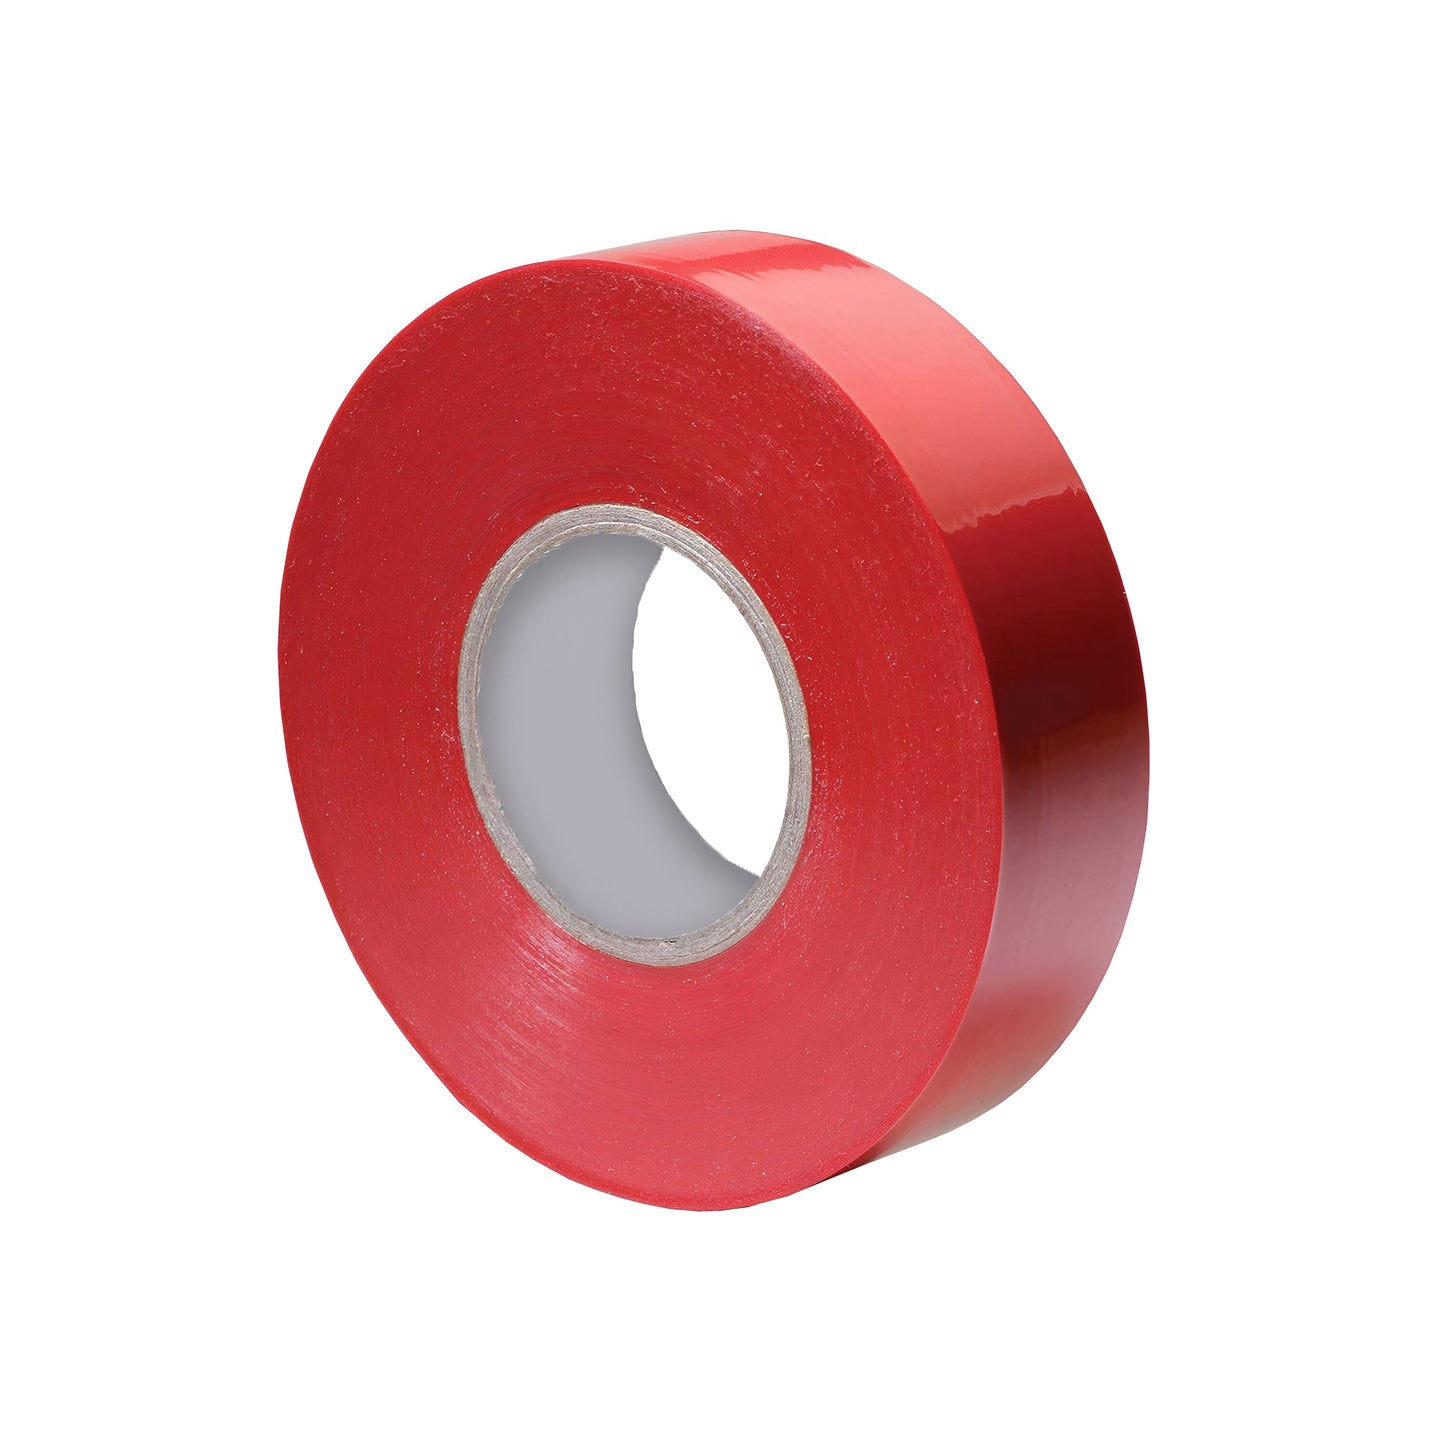 Safe PVC Electrical Coloured Waterproof Insulating Flame Tape~ 3506